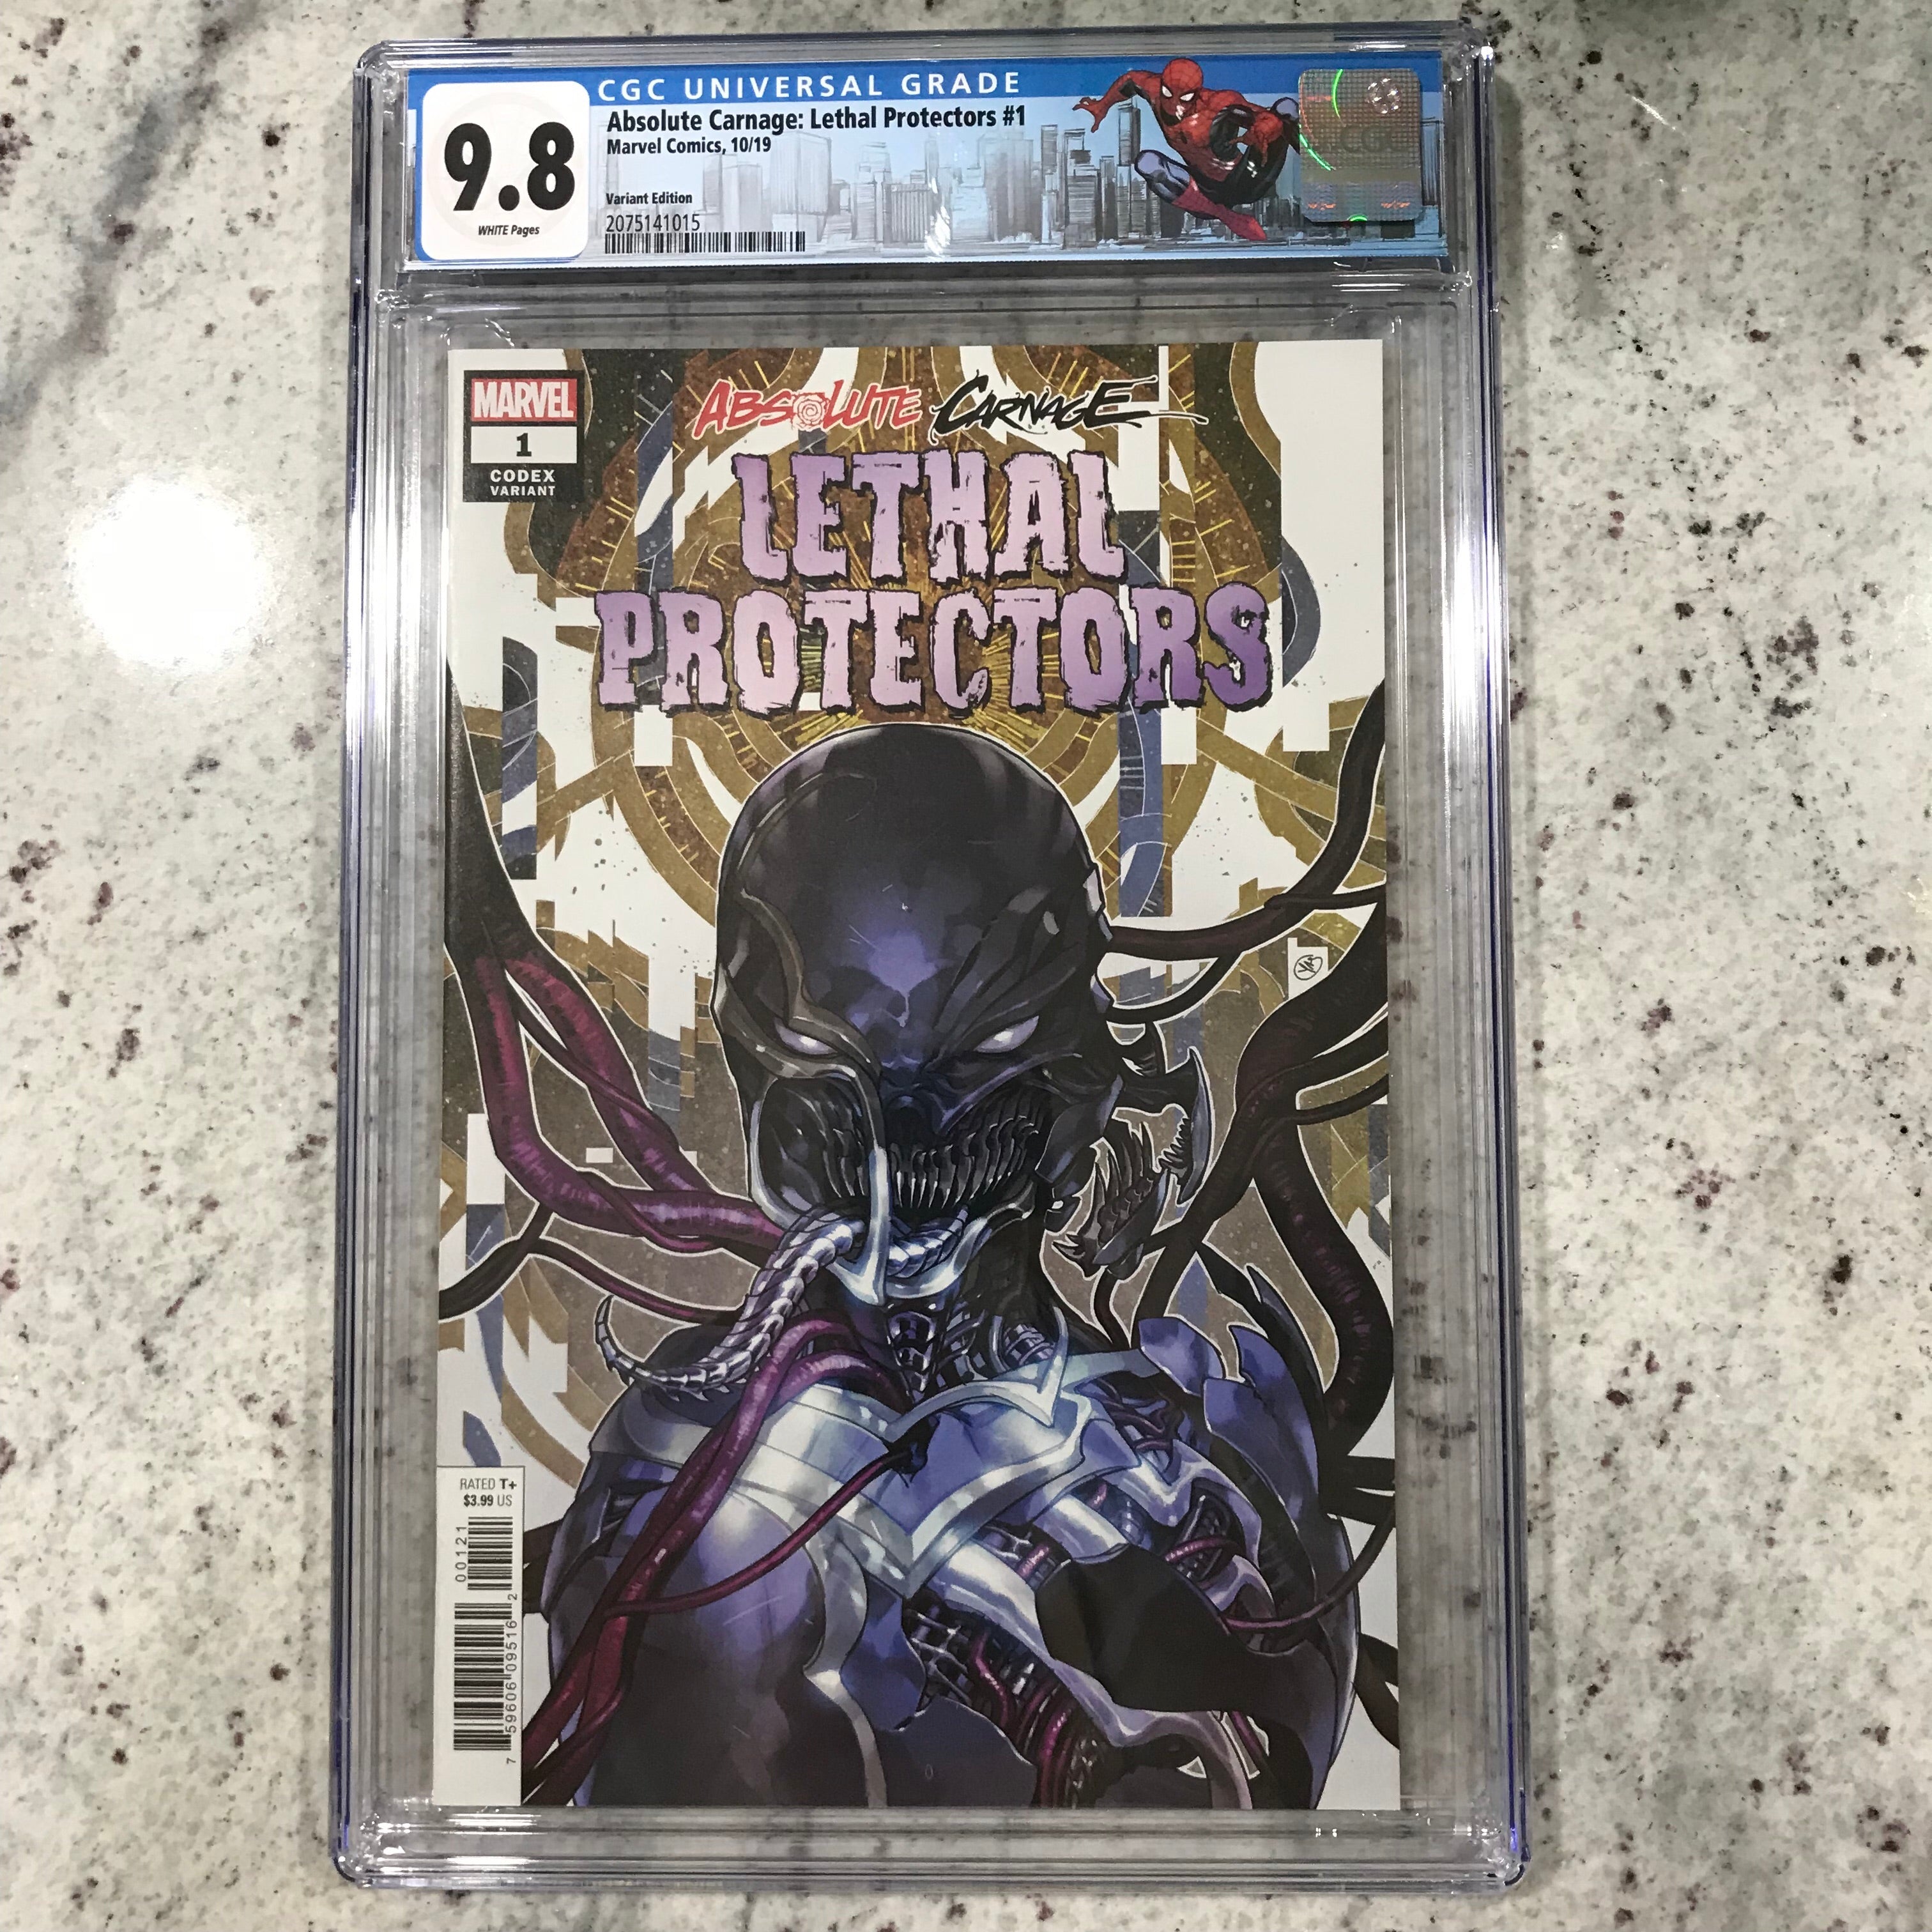 ABSOLUTE CARNAGE LETHAL PROTECTORS #1 (OF 3) PUTRI 1:25 CODEX VARIANT CGC 9.8